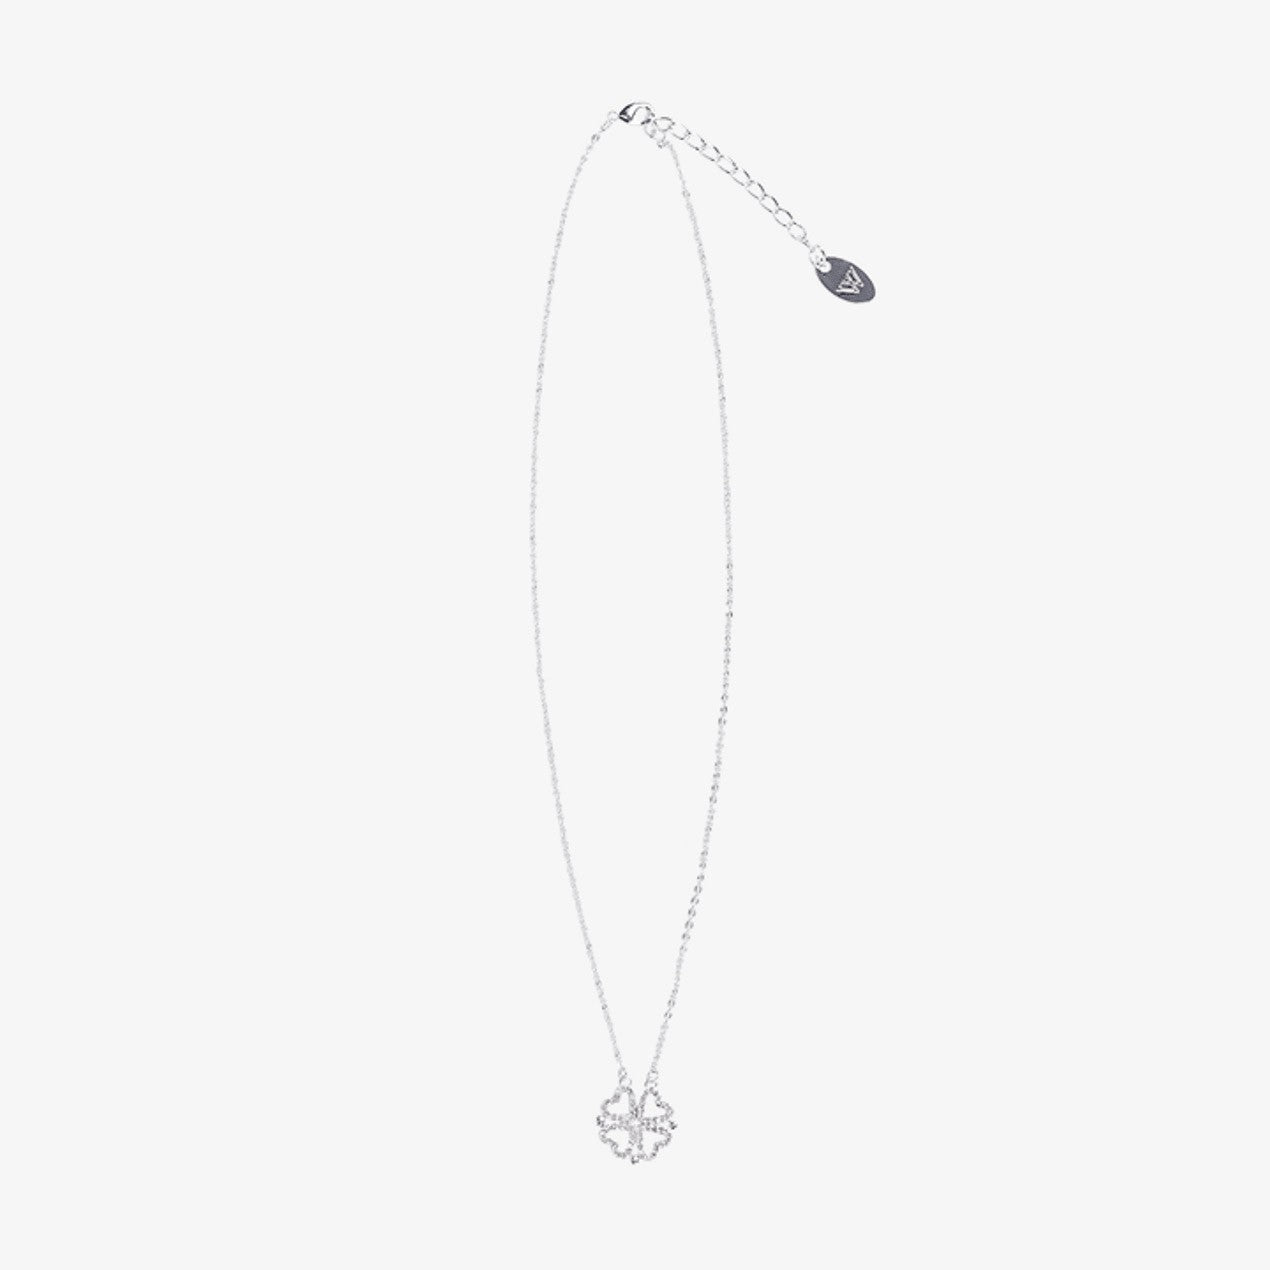 WINNER THE CIRCLE Goods - TEAM NECKLACE - kpoptown.ca